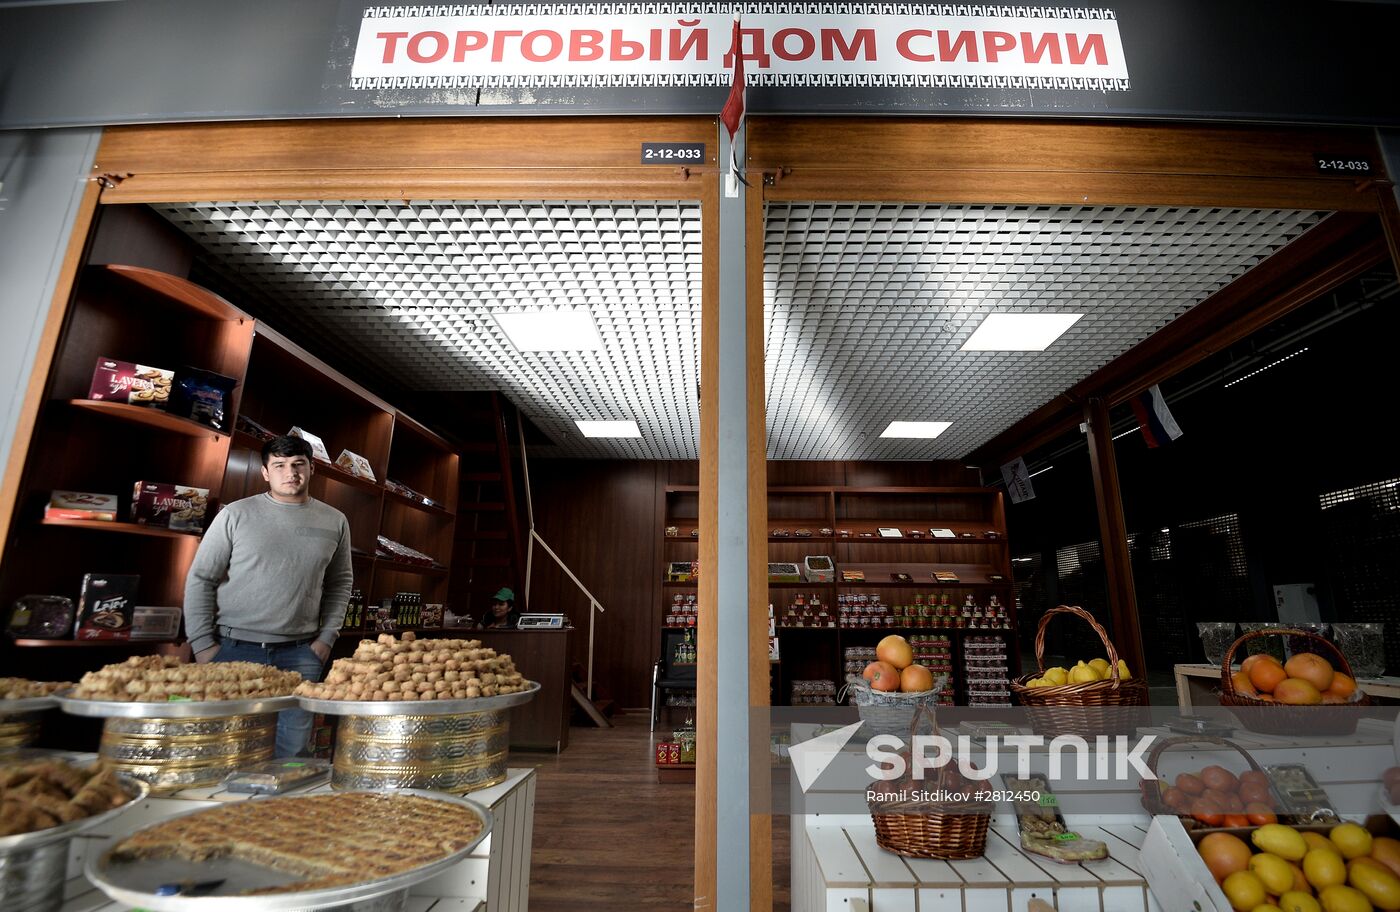 Goods from Syria sold in Moscow